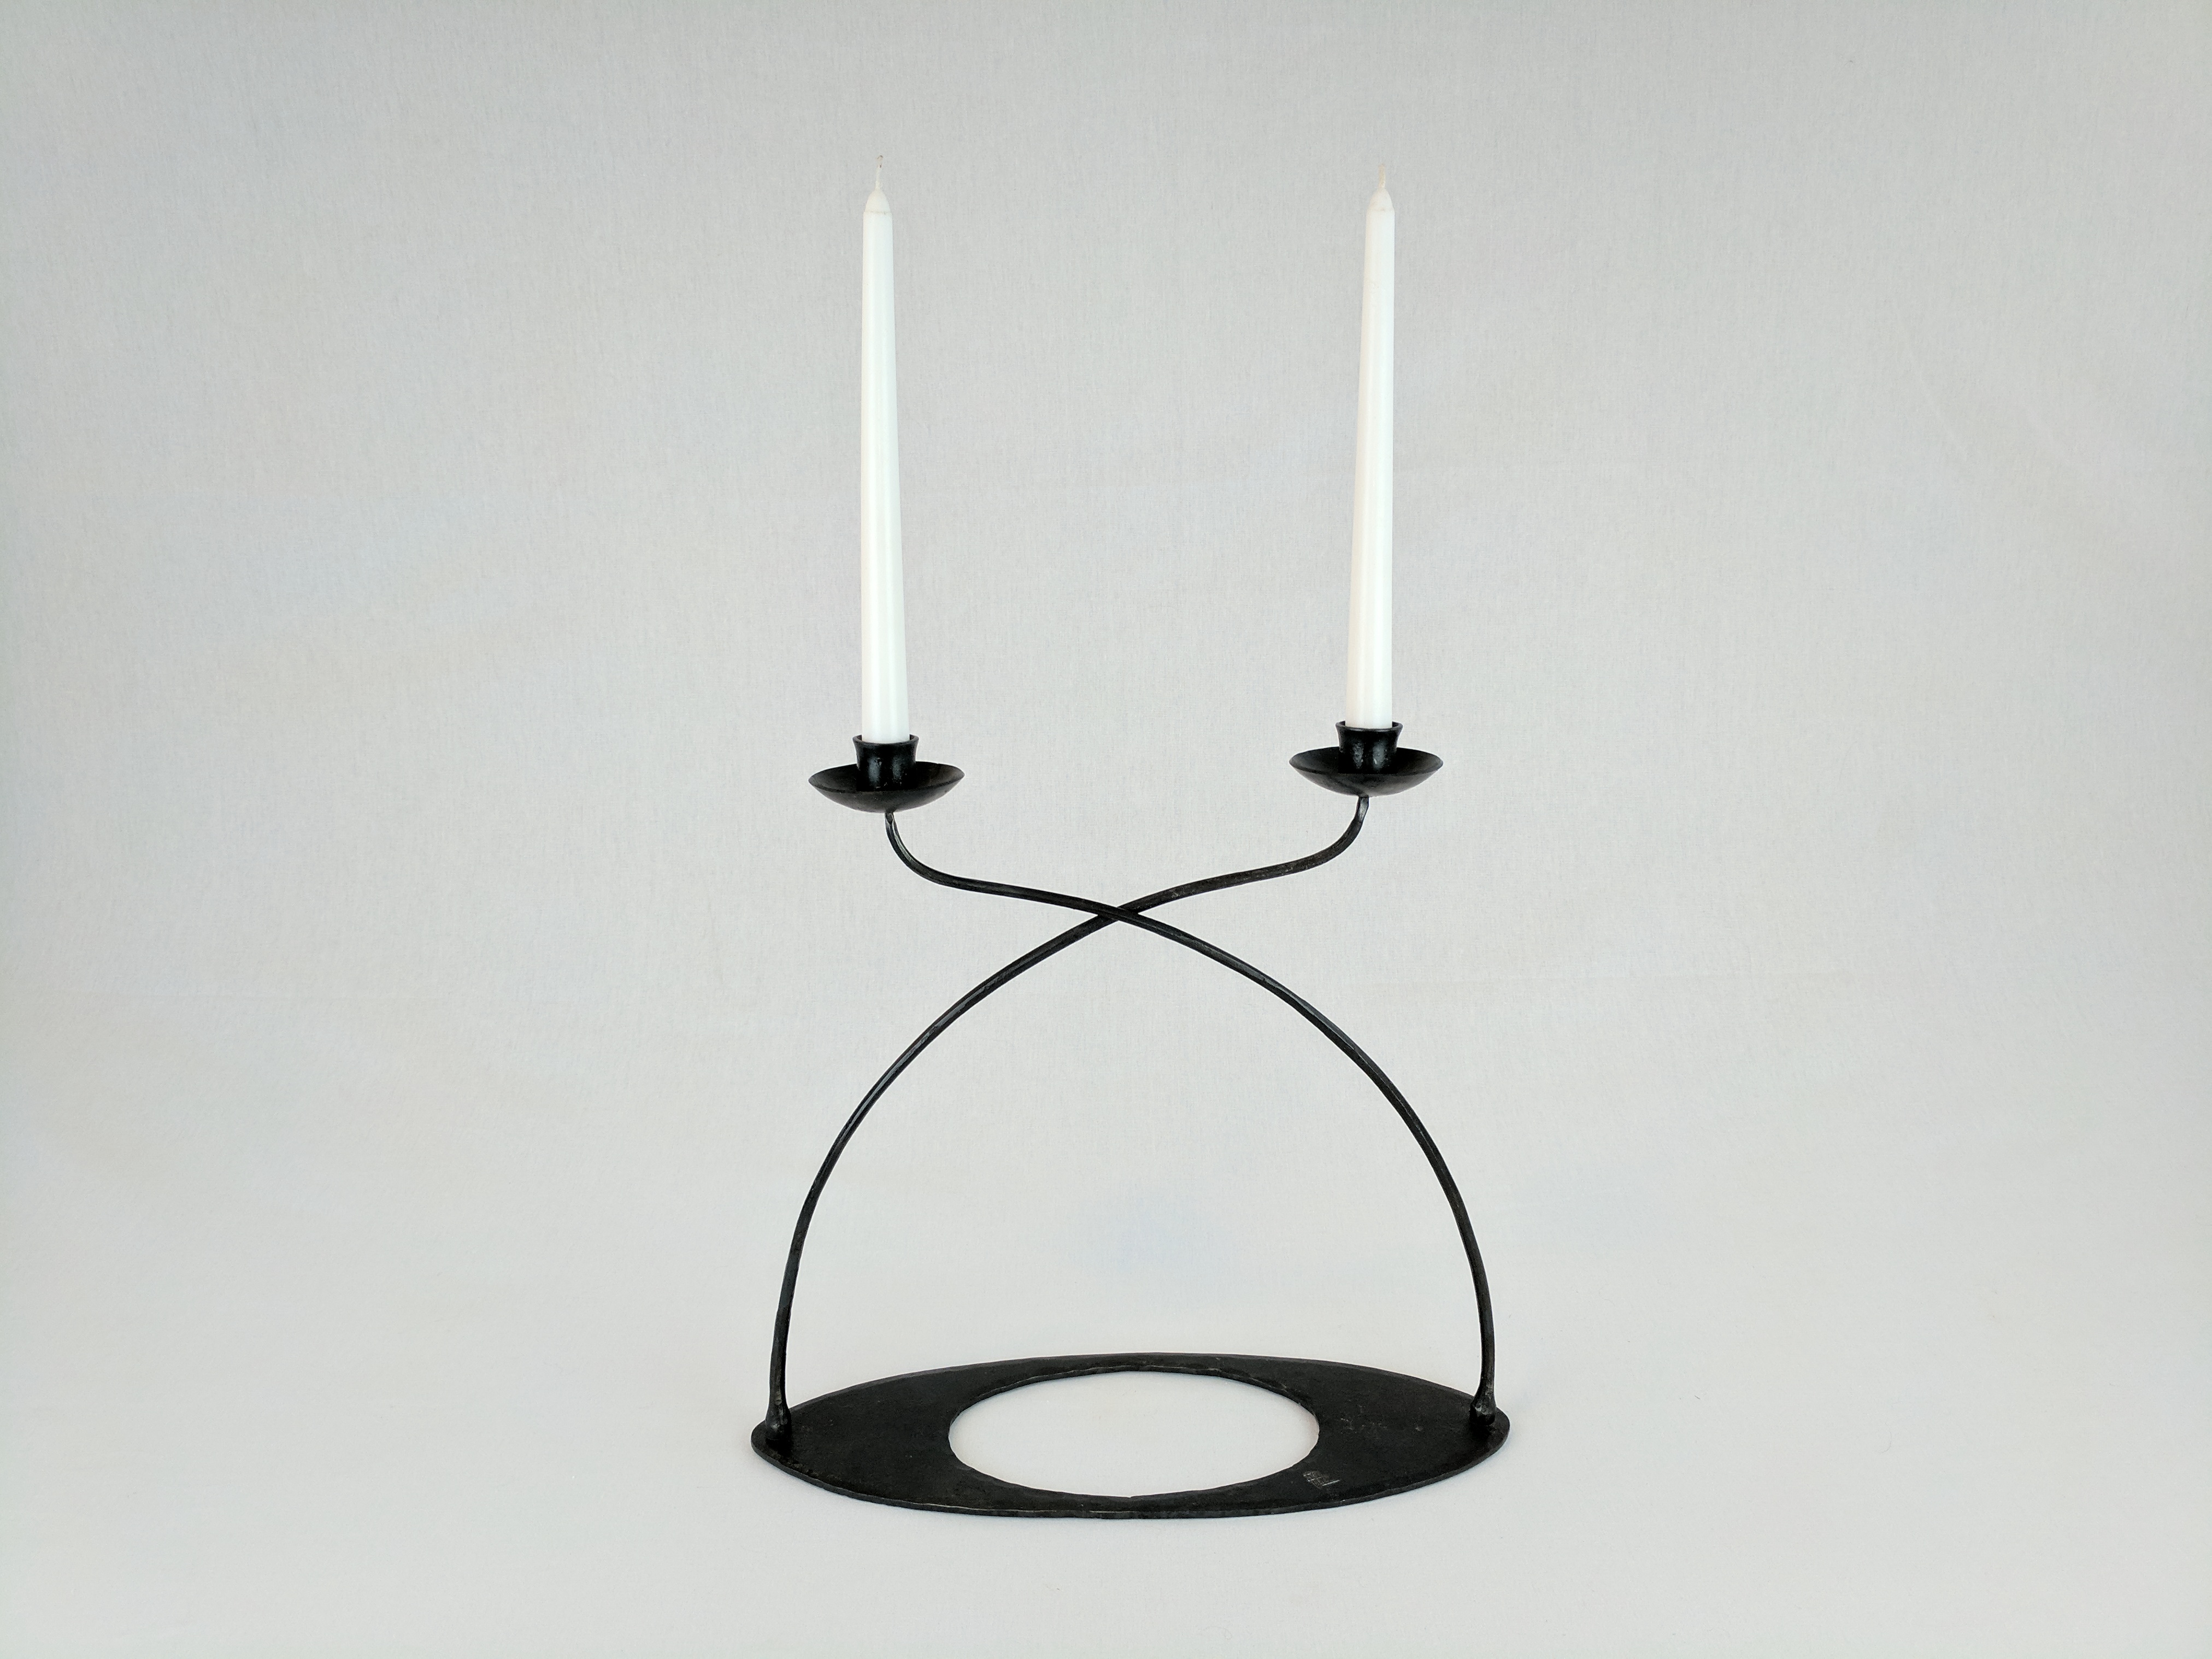 Slimline forged dual candlestick